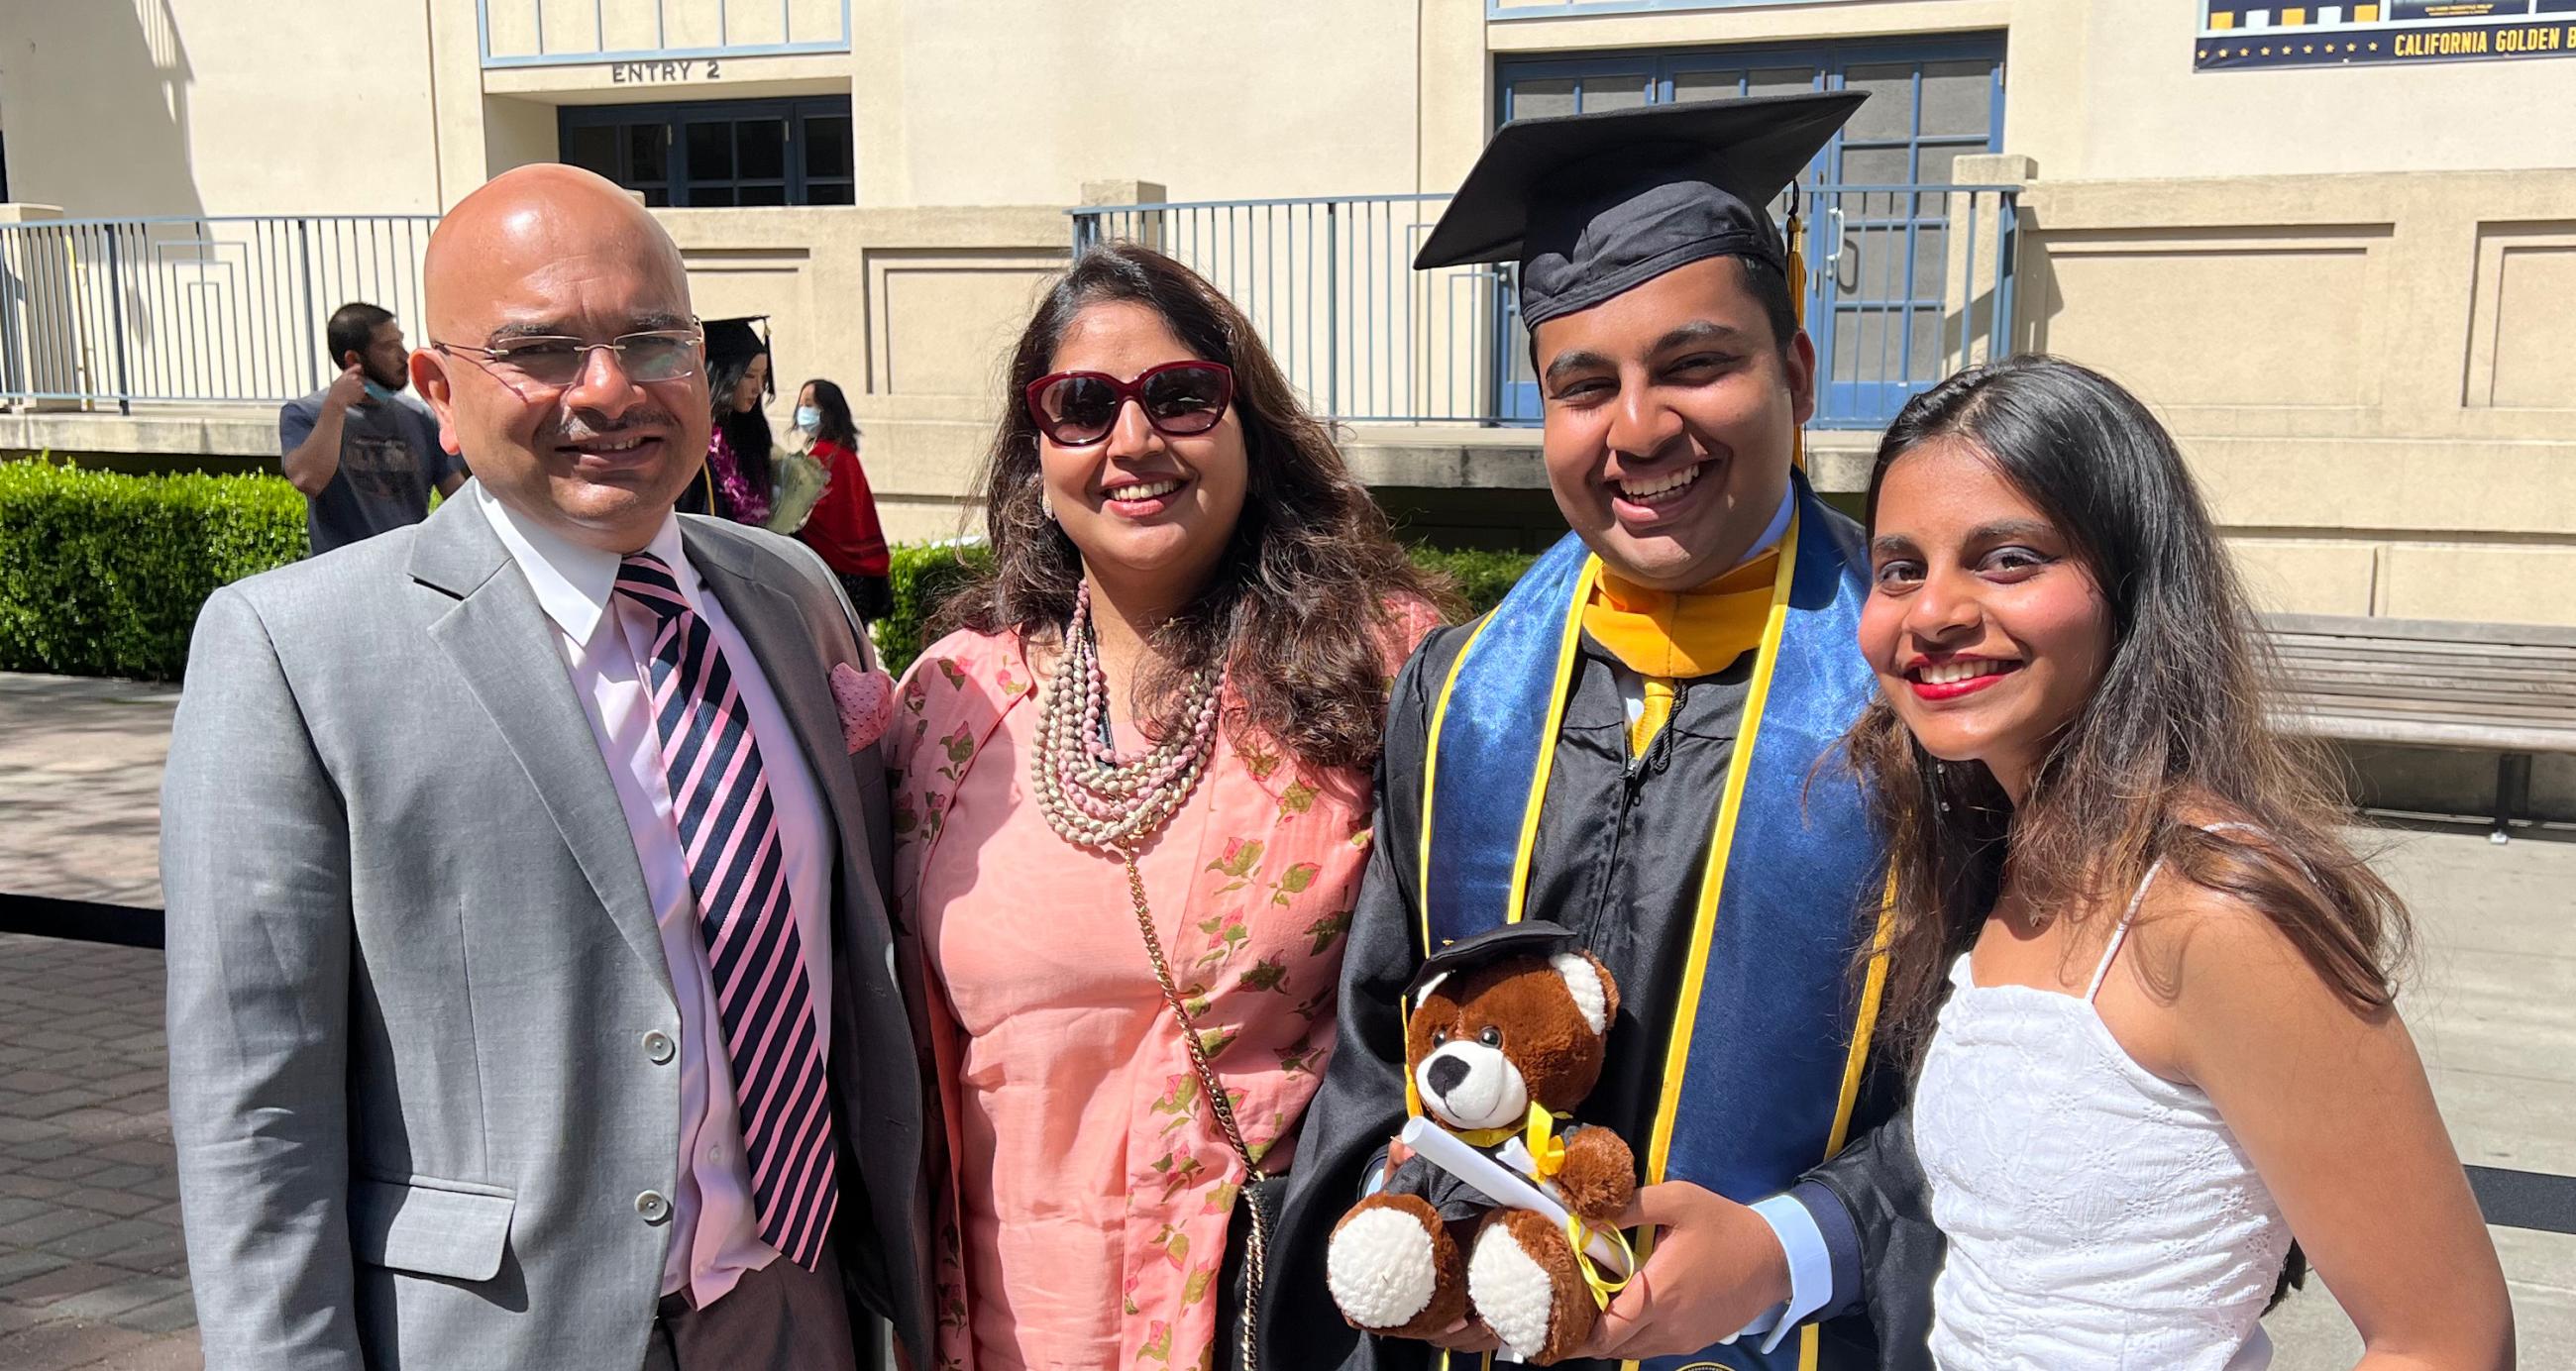 Ishaan Srivastava, the master’s student speaker at Statistics commencement, celebrates with his family following the ceremony. (Photo/ Mansi Shah)